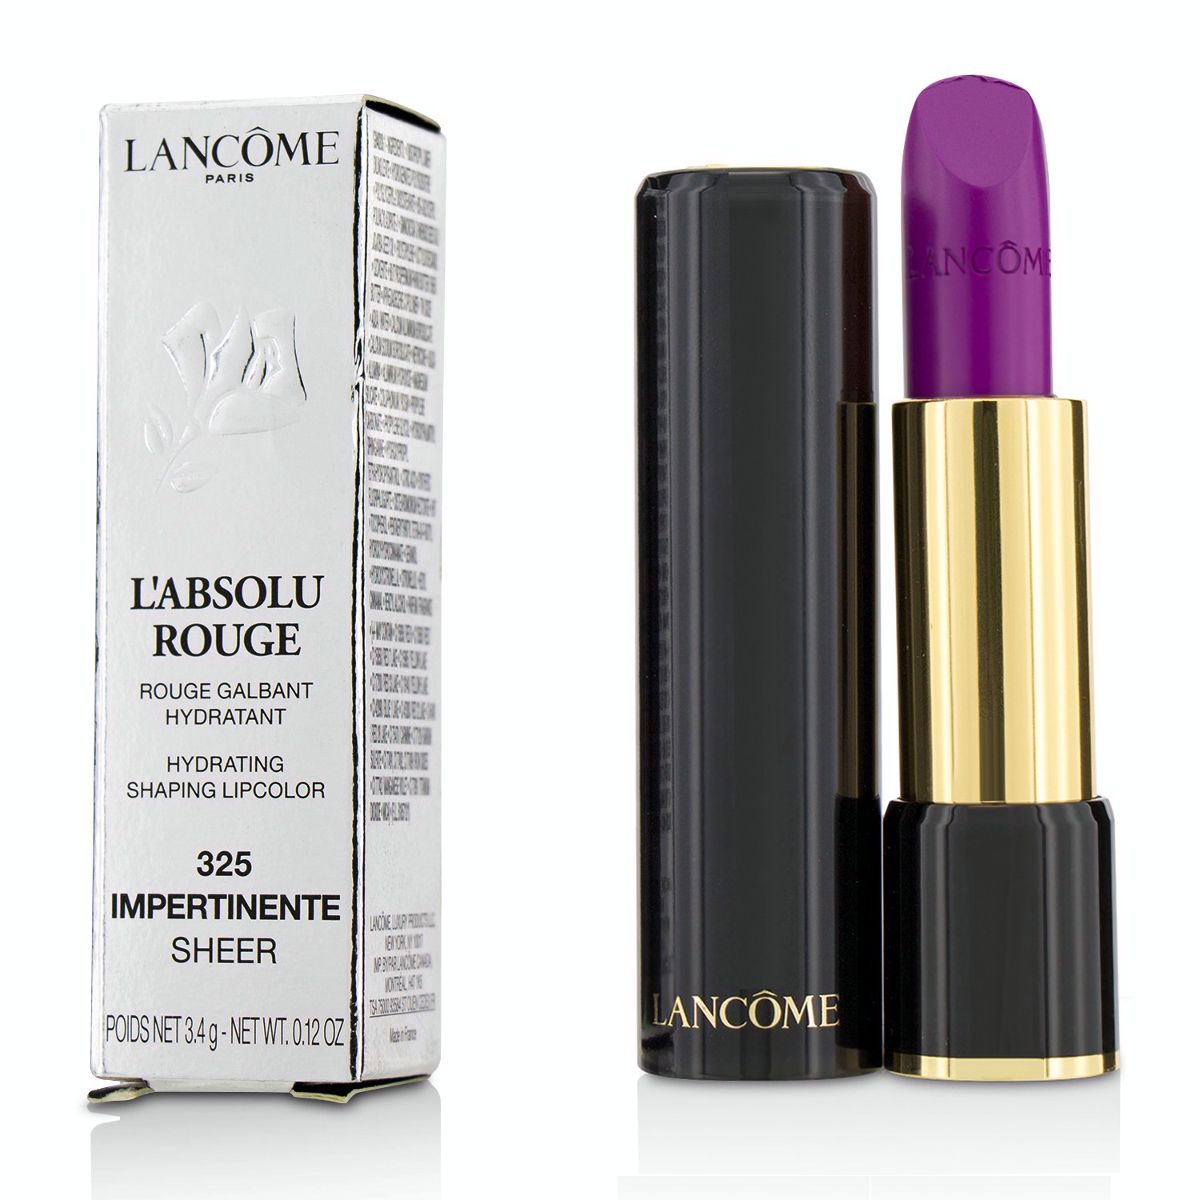 L Absolu Rouge Hydrating Shaping Lipcolor - # 325 Impertinente (Sheer) Lancome Image